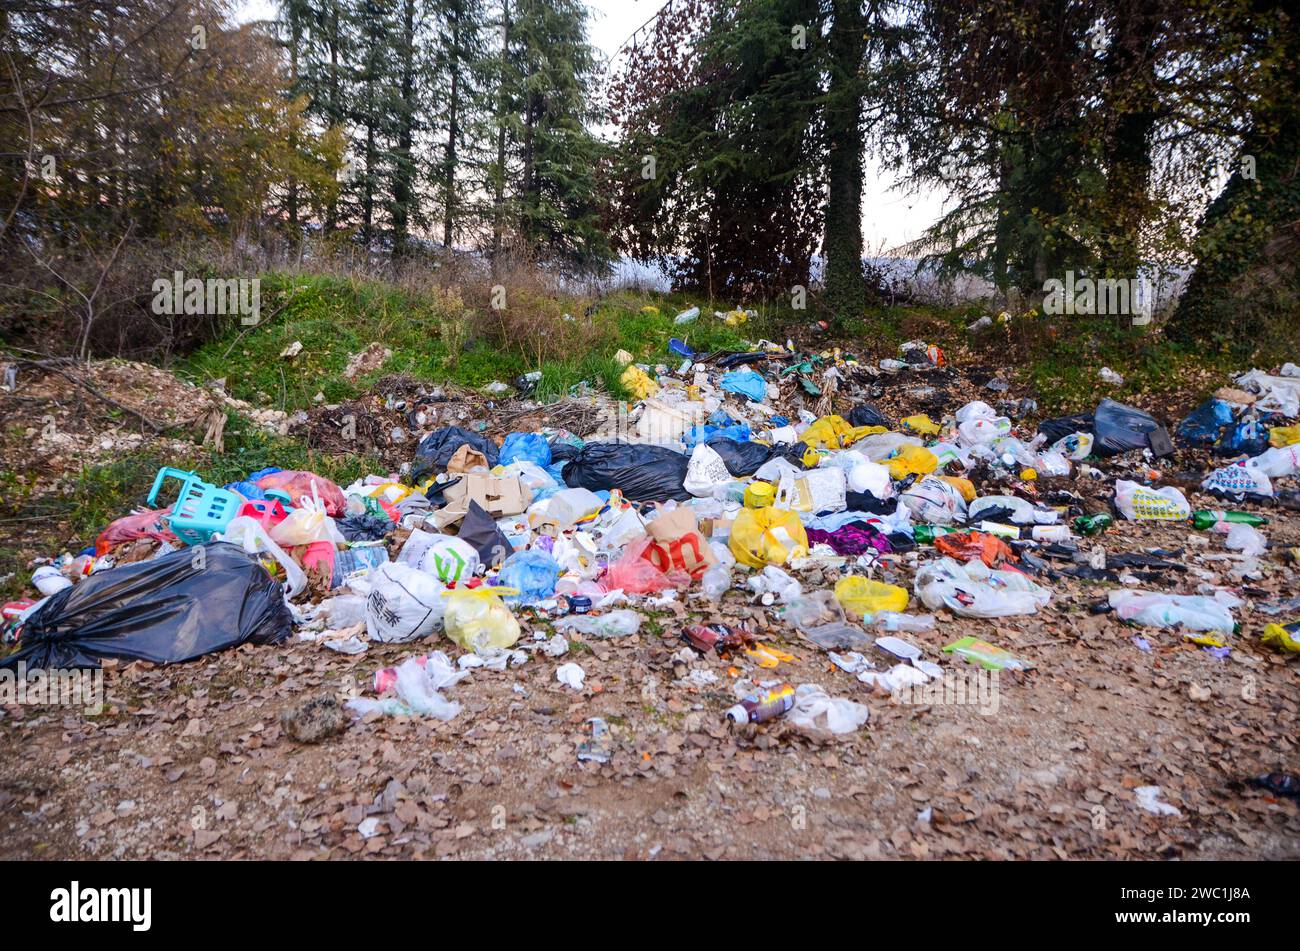 Illegal dumping in nature. Garbage dump in forest. Environmental pollution. Ecological and environmental problem. Stock Photo